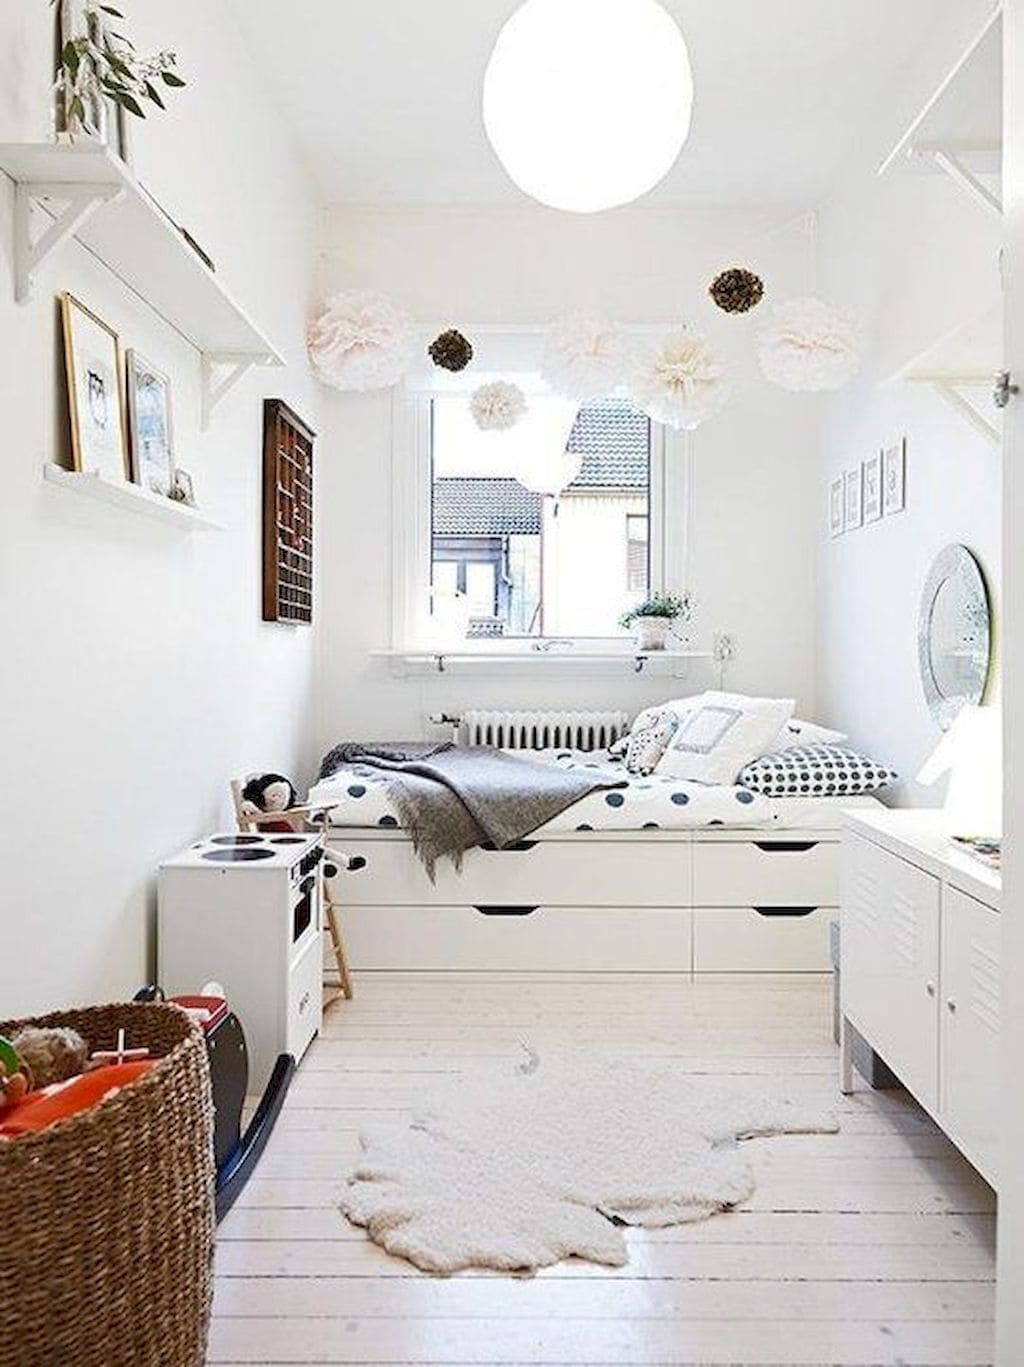 23 creative storage bed ideas to add to your bag - 173